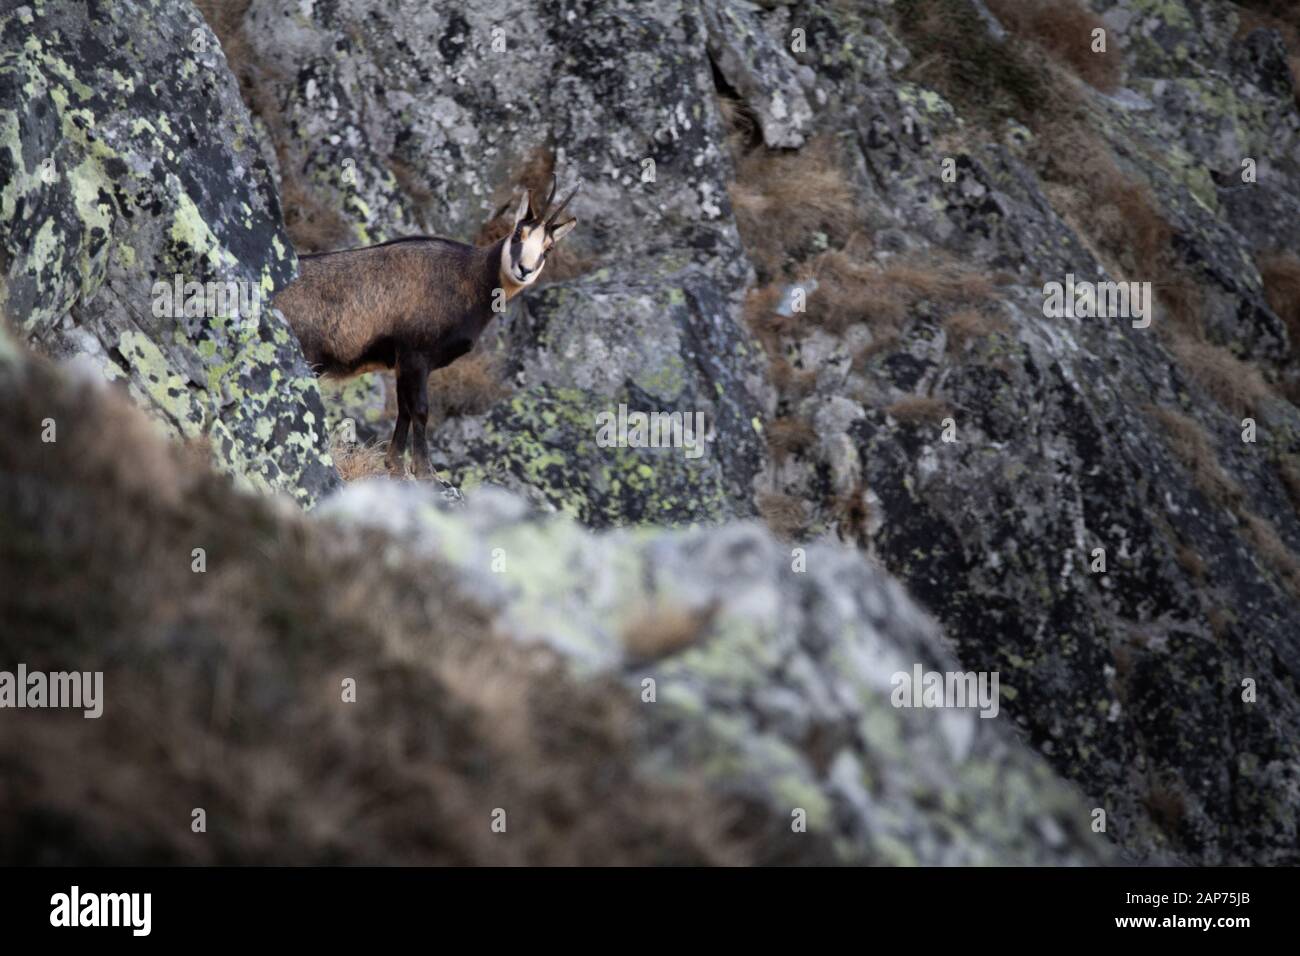 Rupicapra is a genus of goat-antelope called the chamois. They belong to the bovine family of hoofed mammals, the Bovidae. Retezat National Park wild. Stock Photo